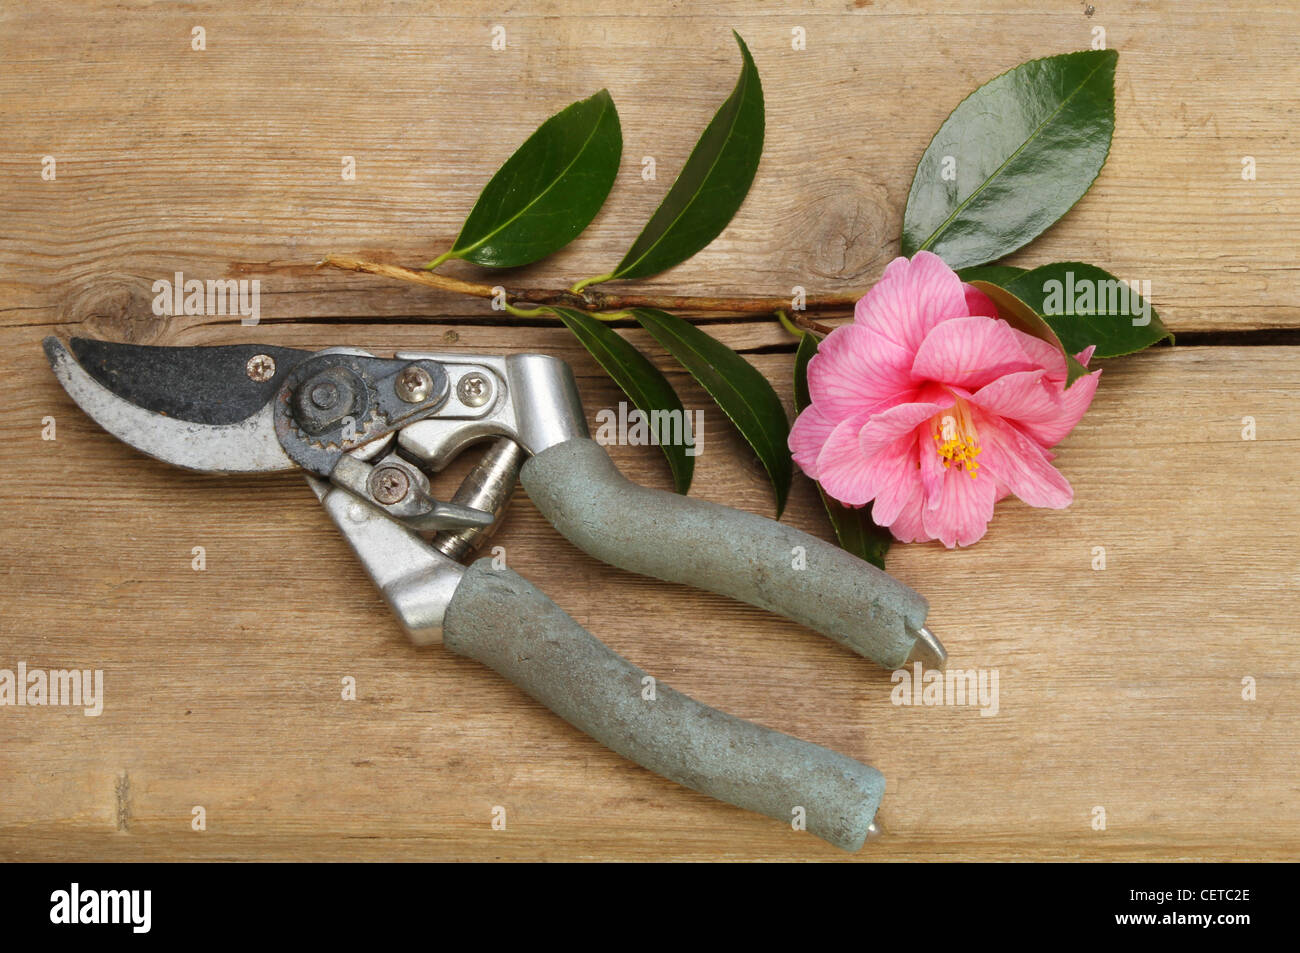 Garden secateurs and cut camellia flower and foliage on a wooden board Stock Photo